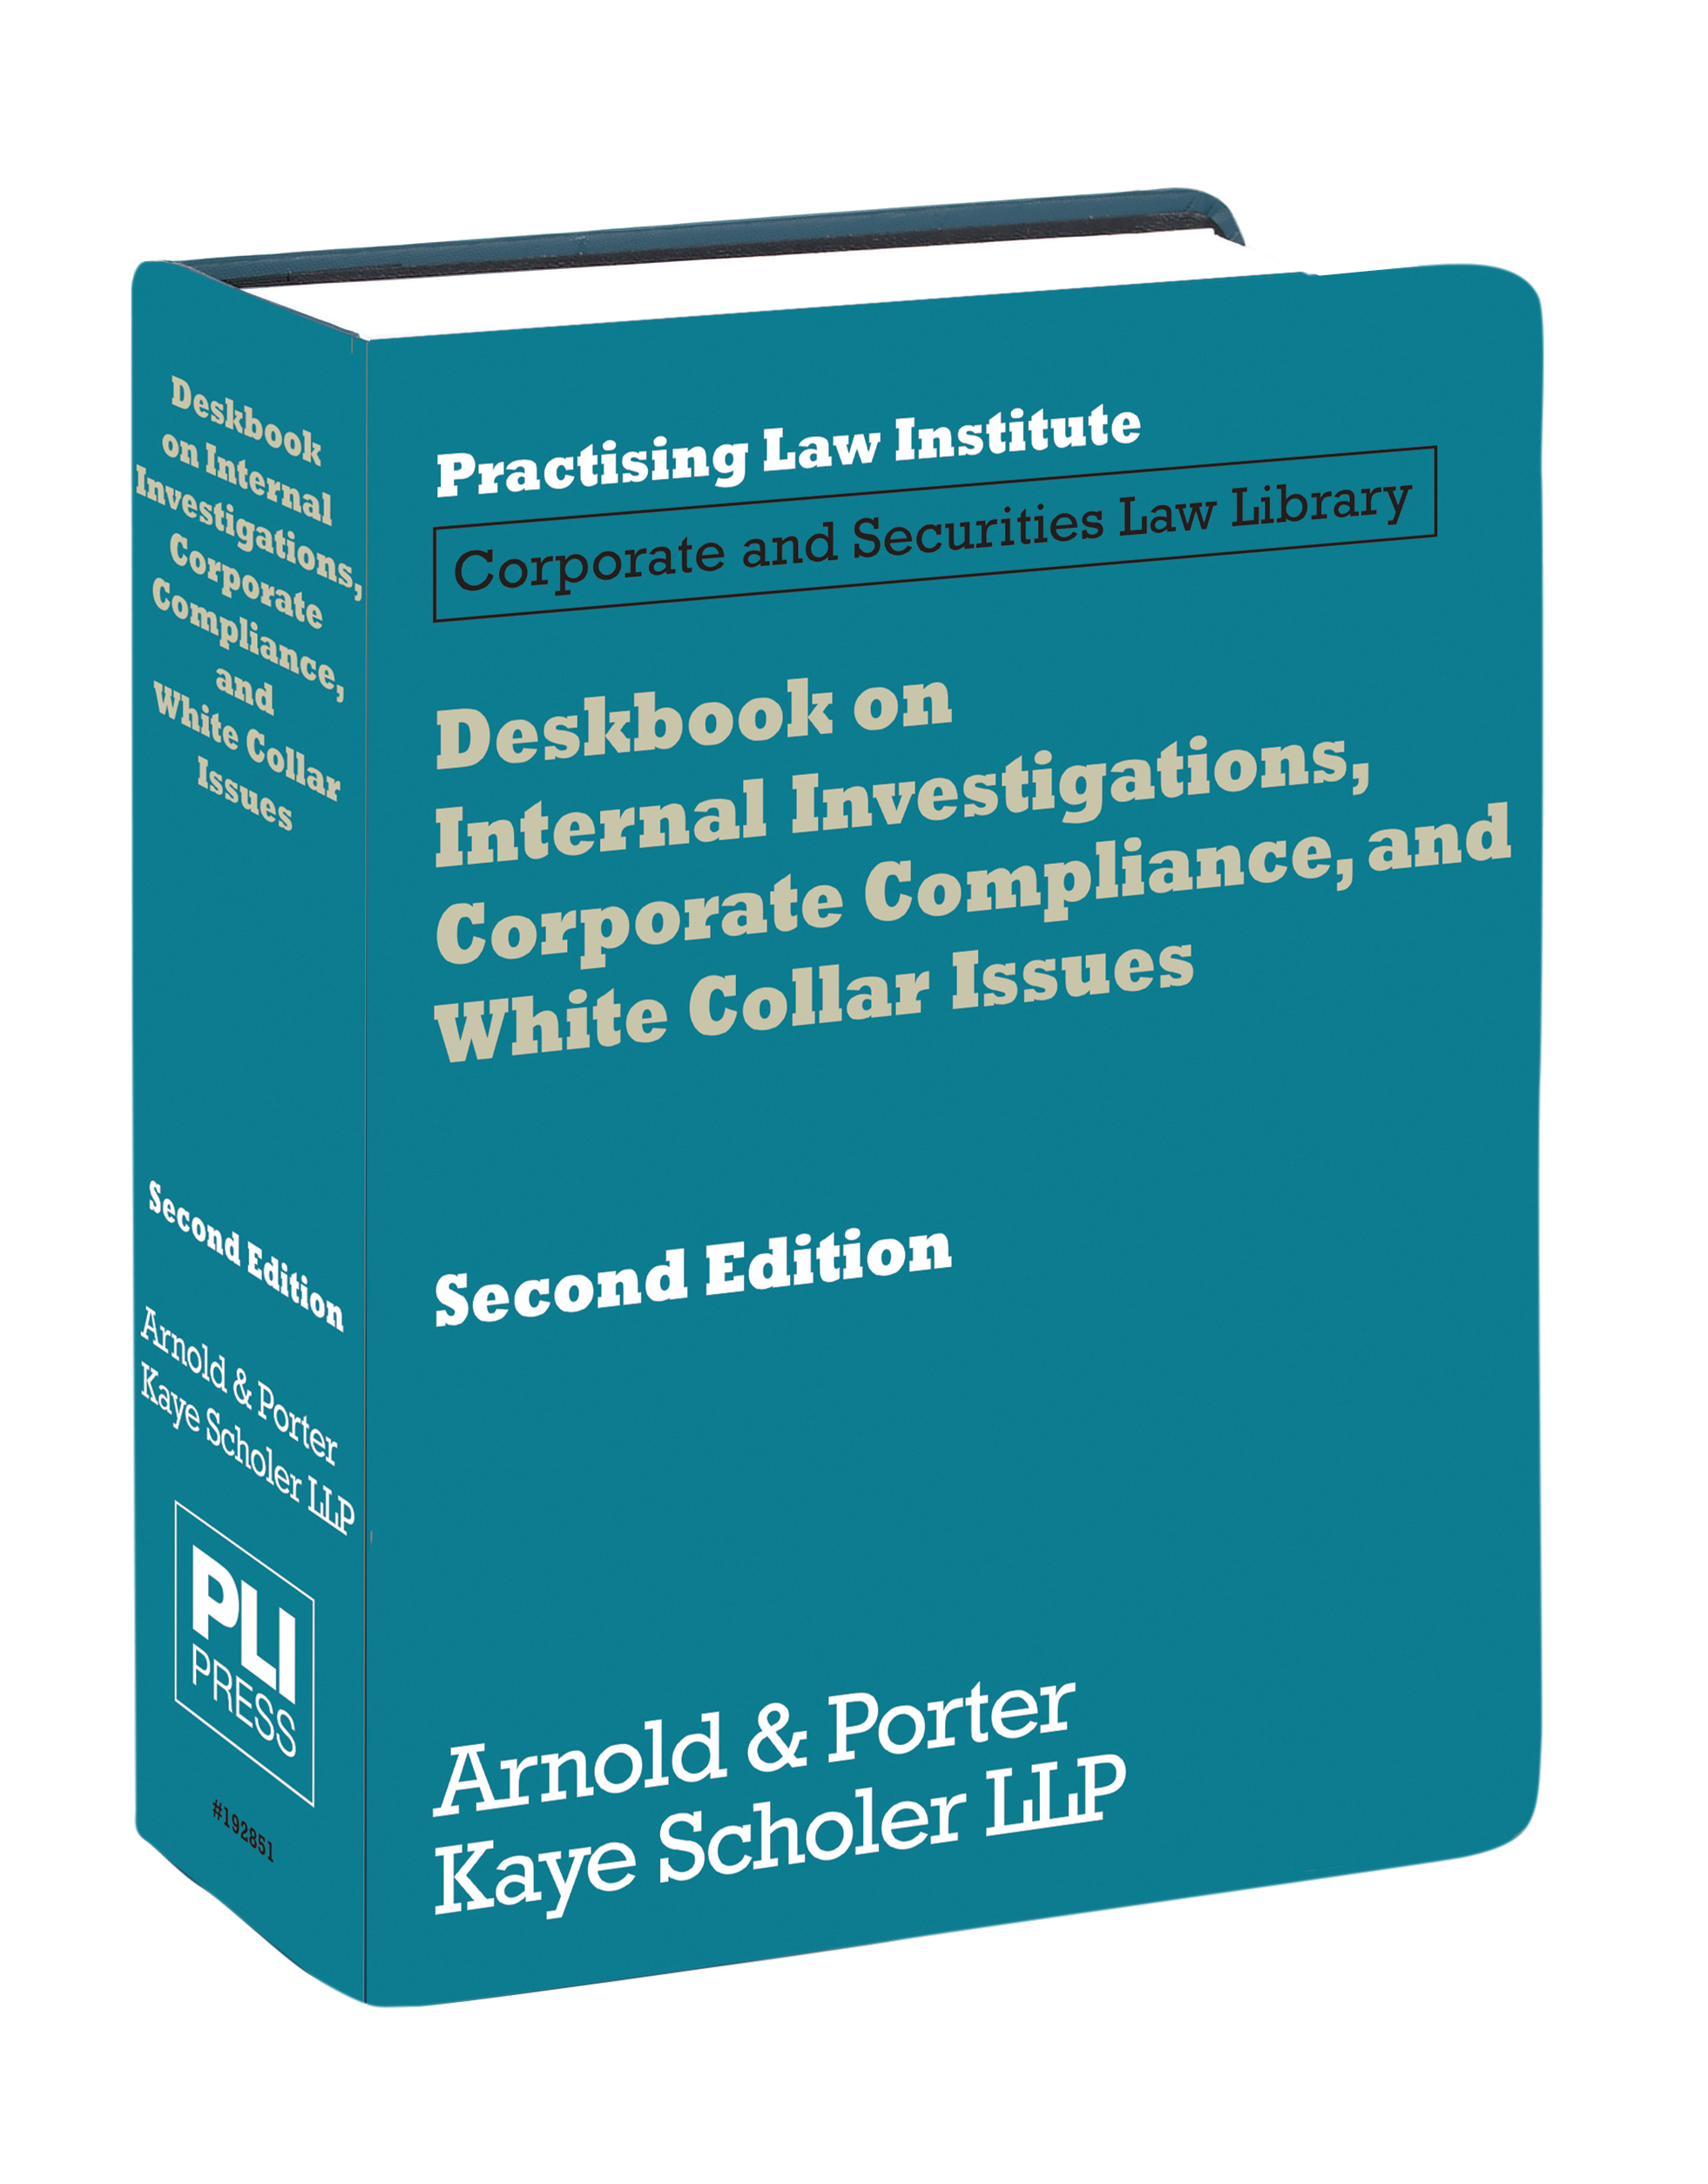 Deskbook on Internal Investigations, Corporate Compliance, and White Collar Issues